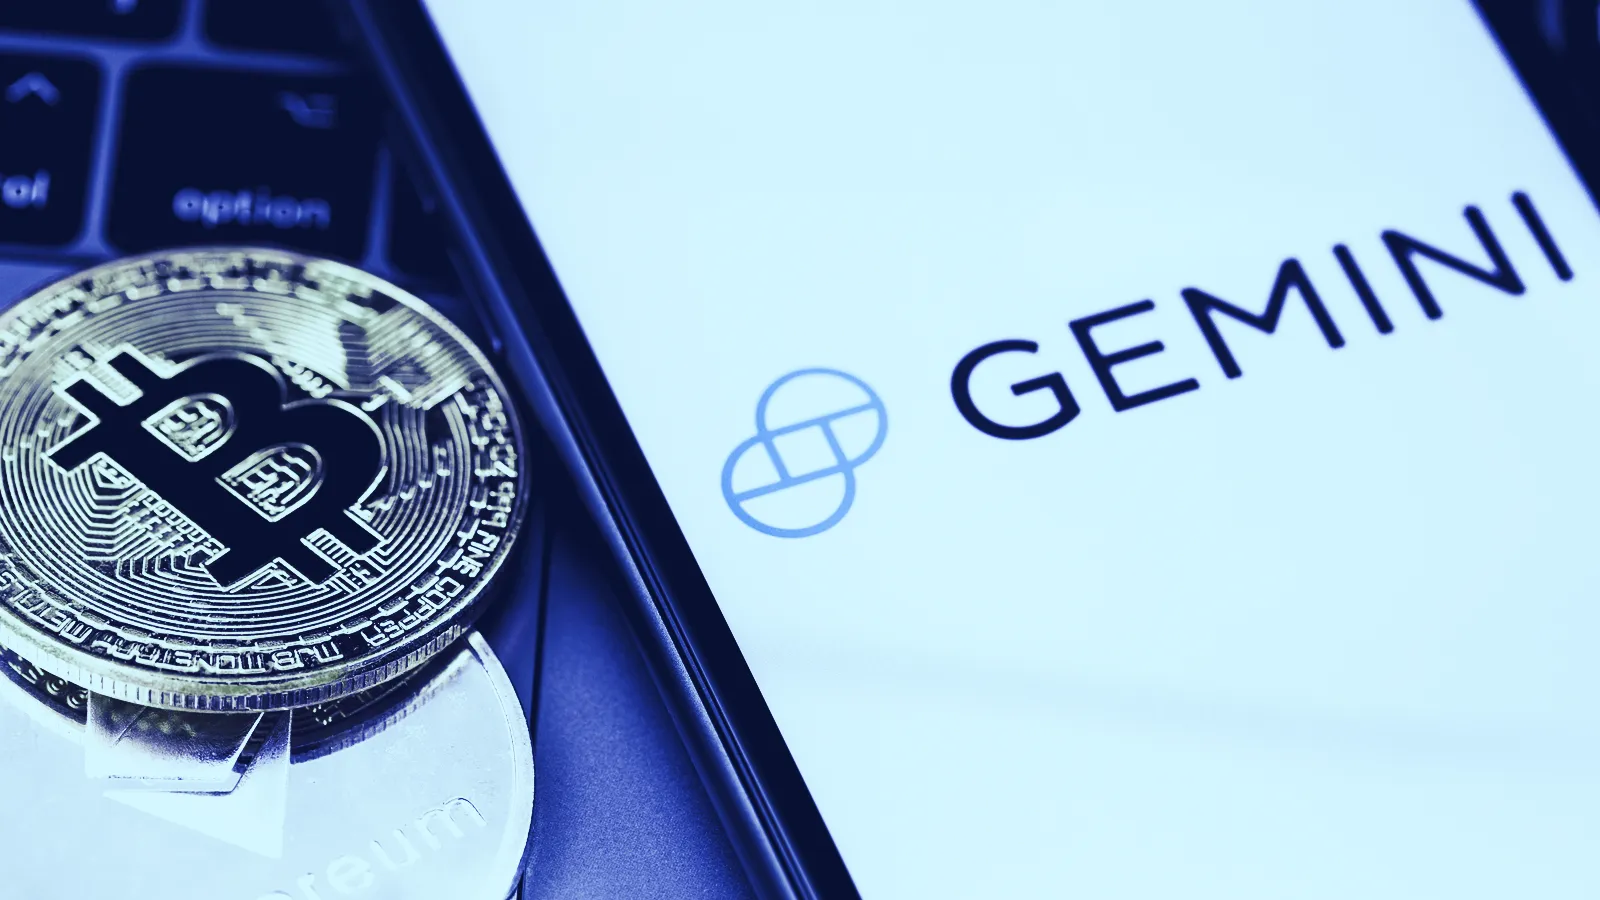 Winklevoss exchange Gemini expands to Asia. Image: Shutterstock